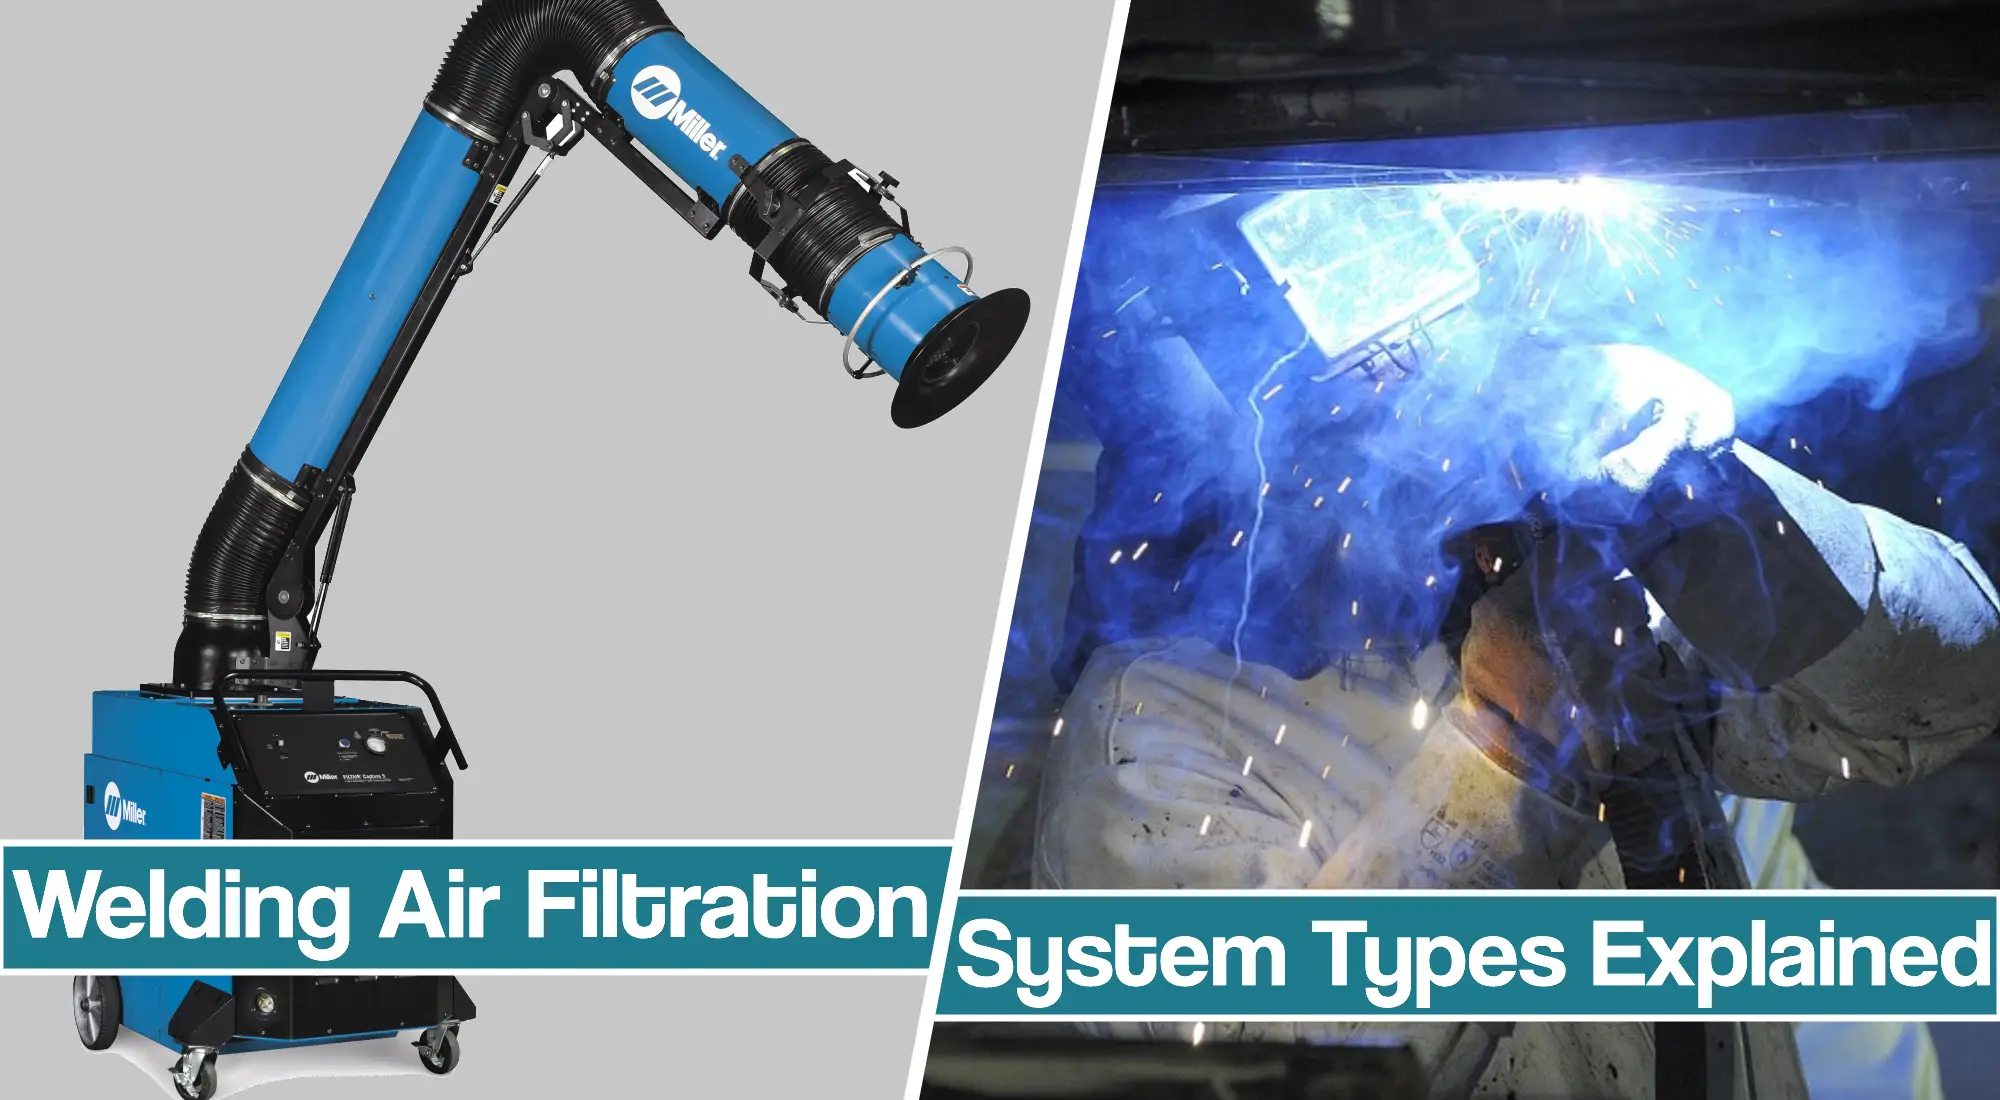 Welding Air Filtration Systems Explained